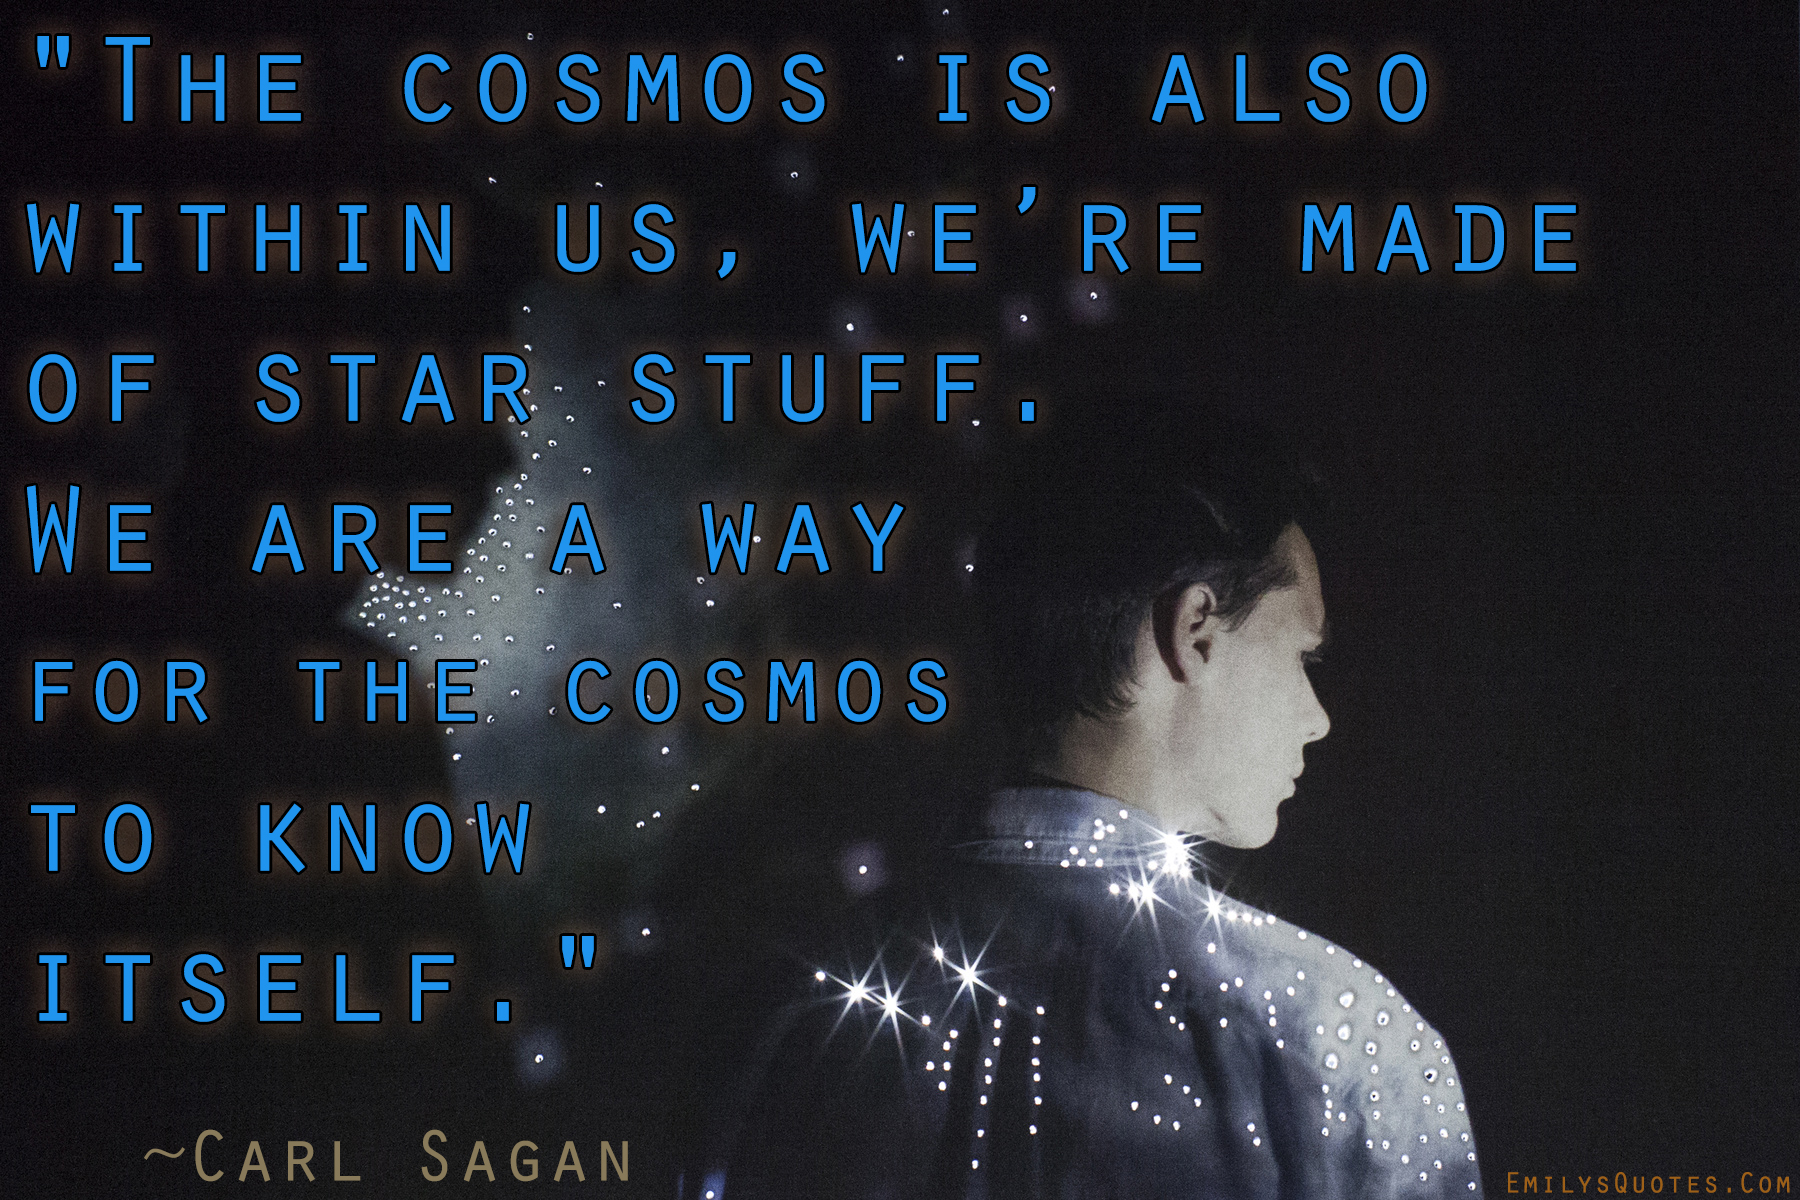 The cosmos is also within us, we’re made of star stuff. We are a way for the cosmos to know itself